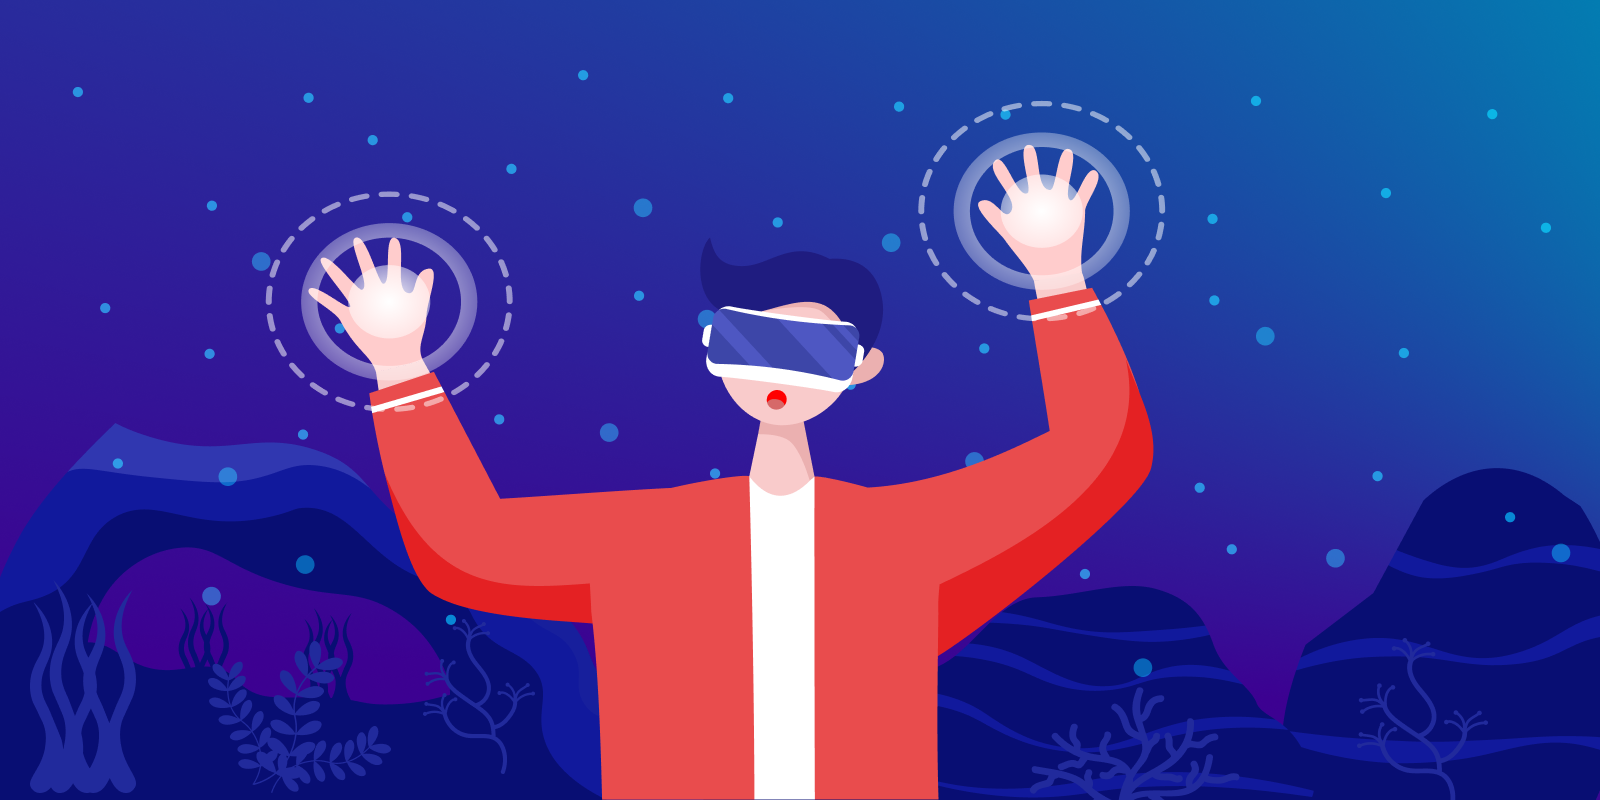 VR and immersive experiences